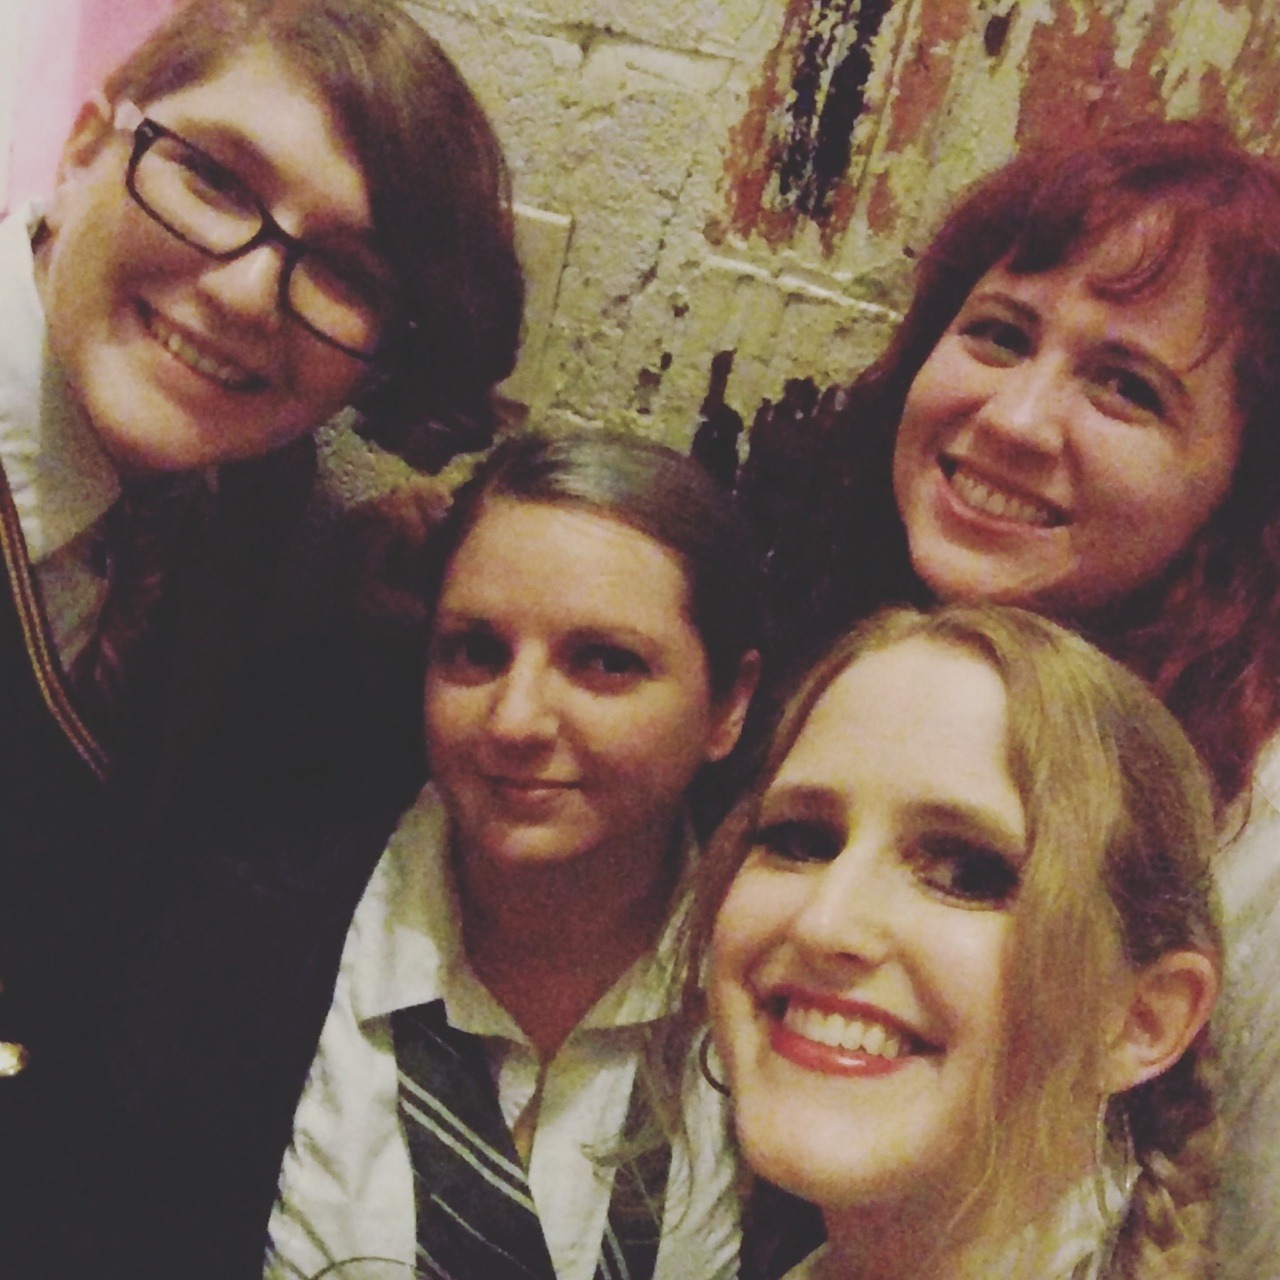 Mid-show selfie backstage at the Black Cat!